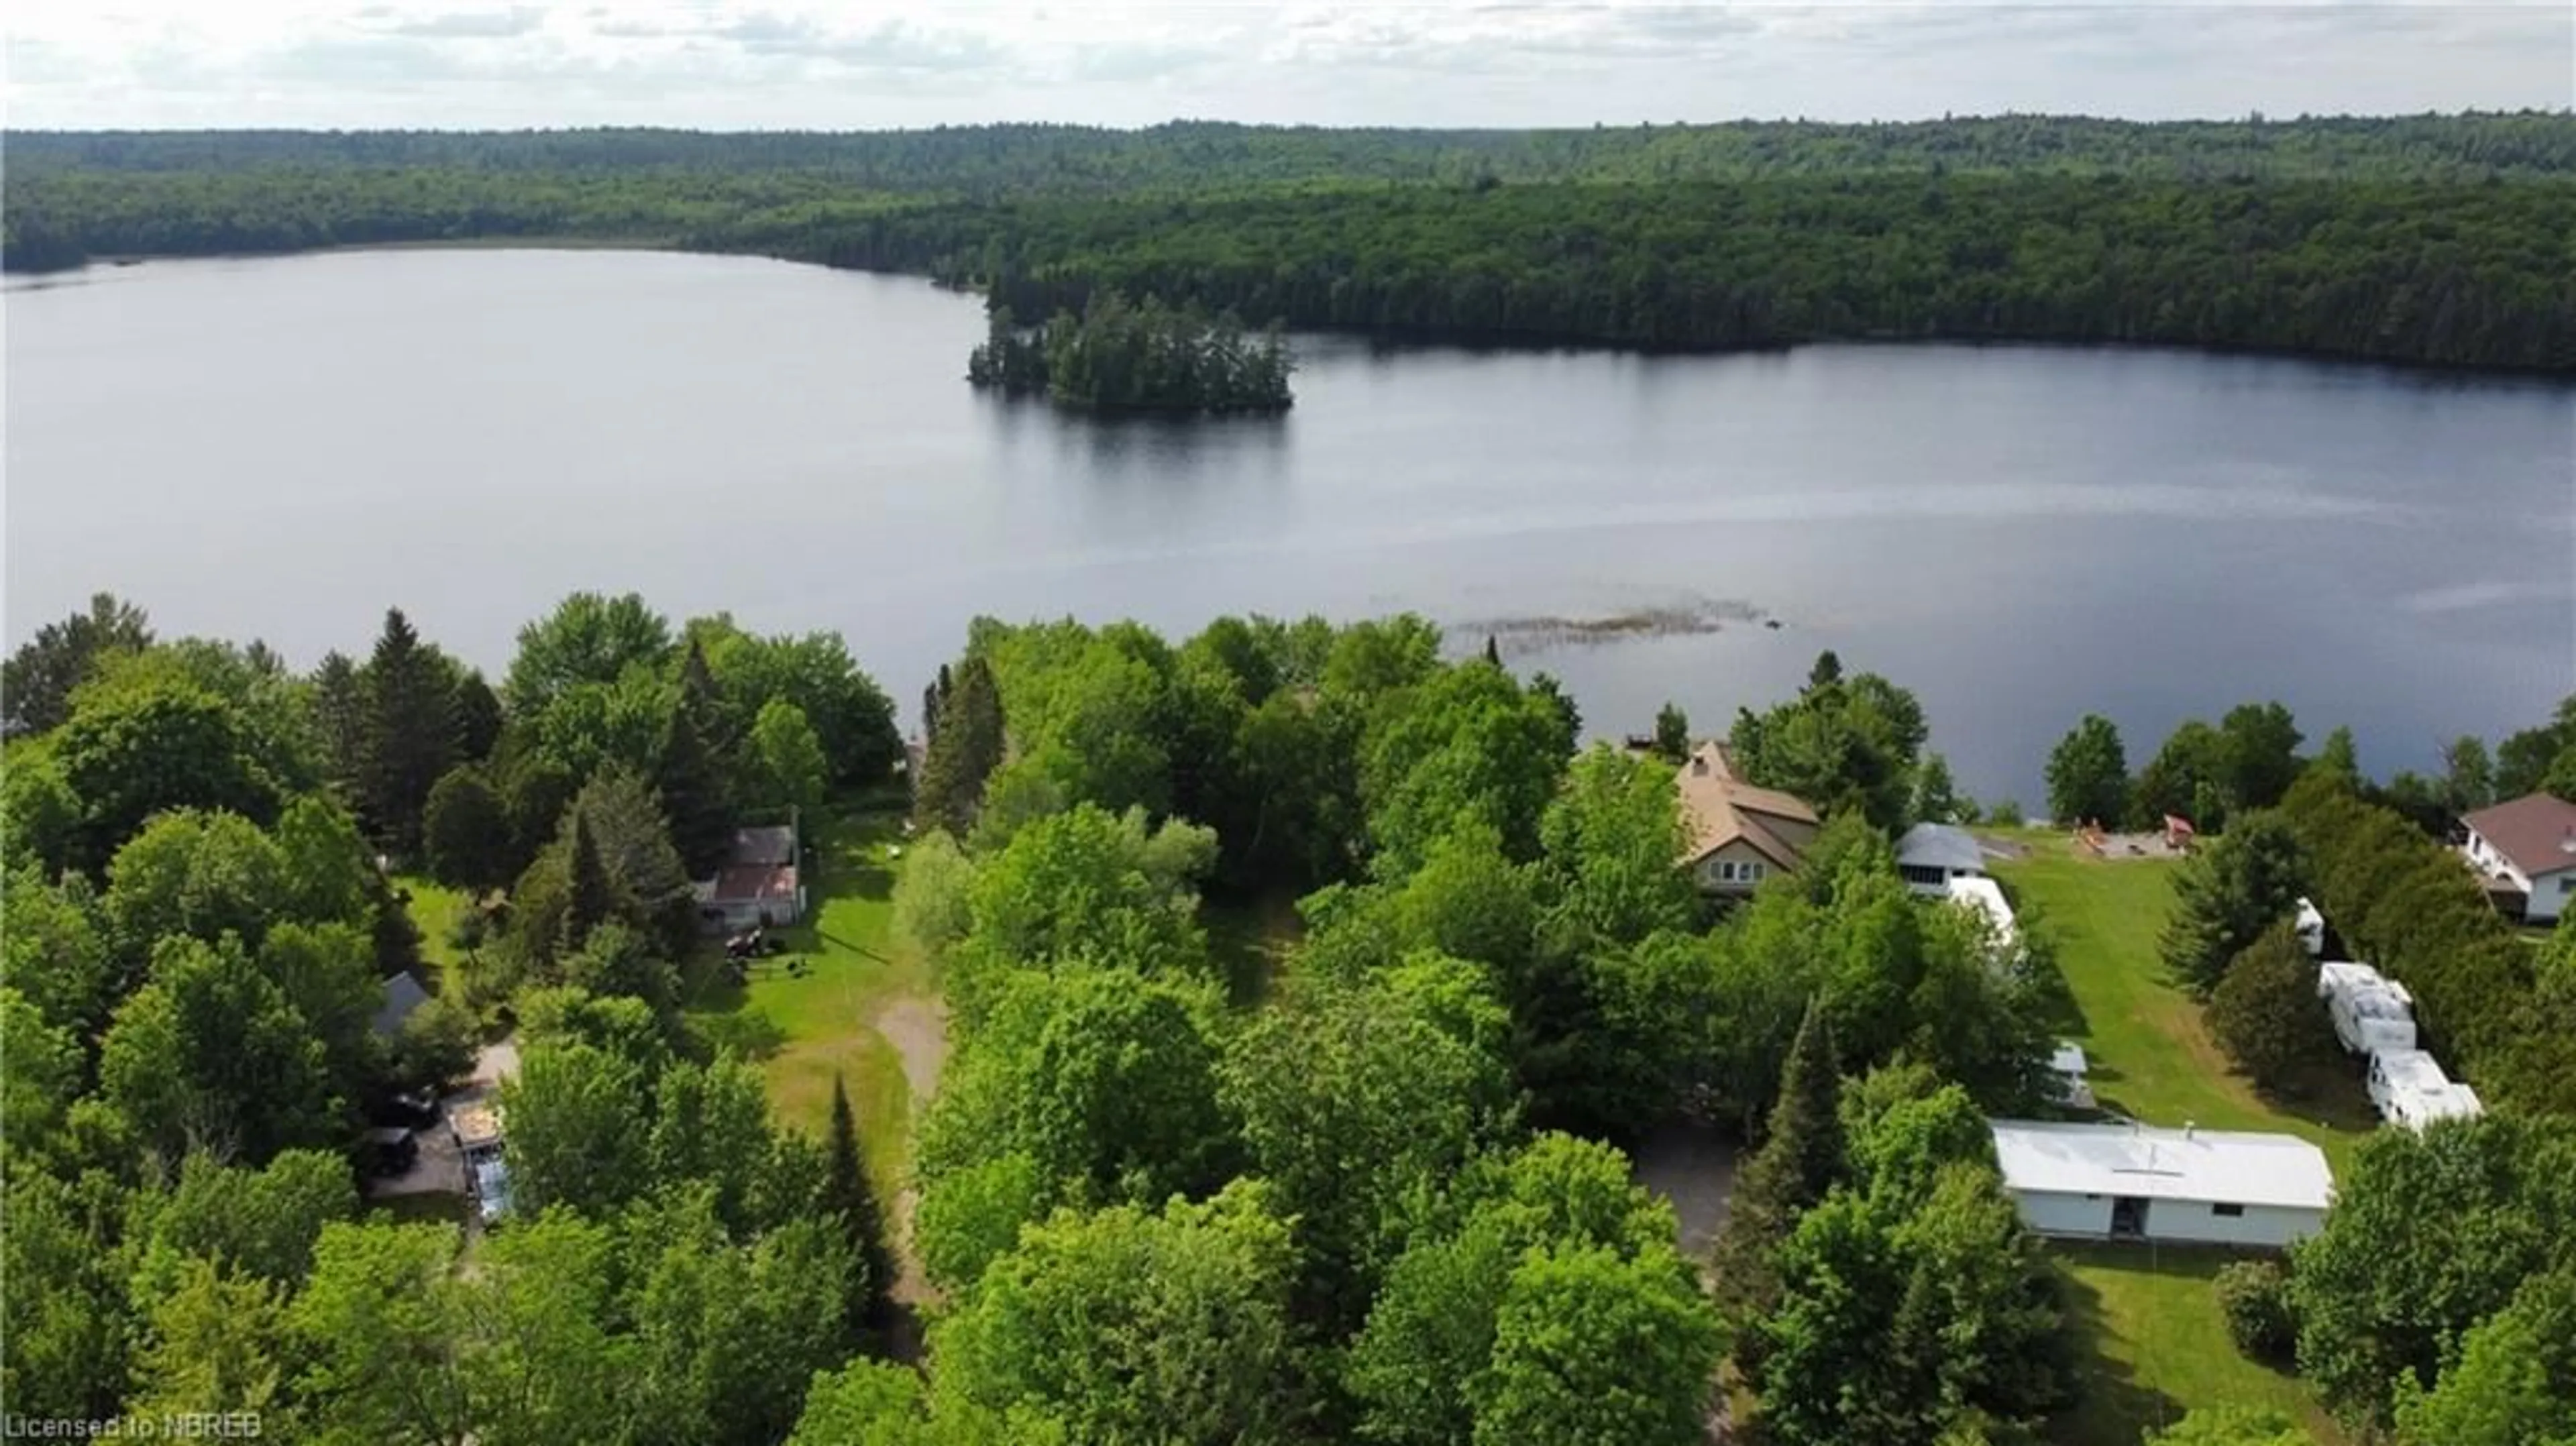 Lakeview for 153 Robitaille Rd, Crystal Falls Ontario P0H 1L0